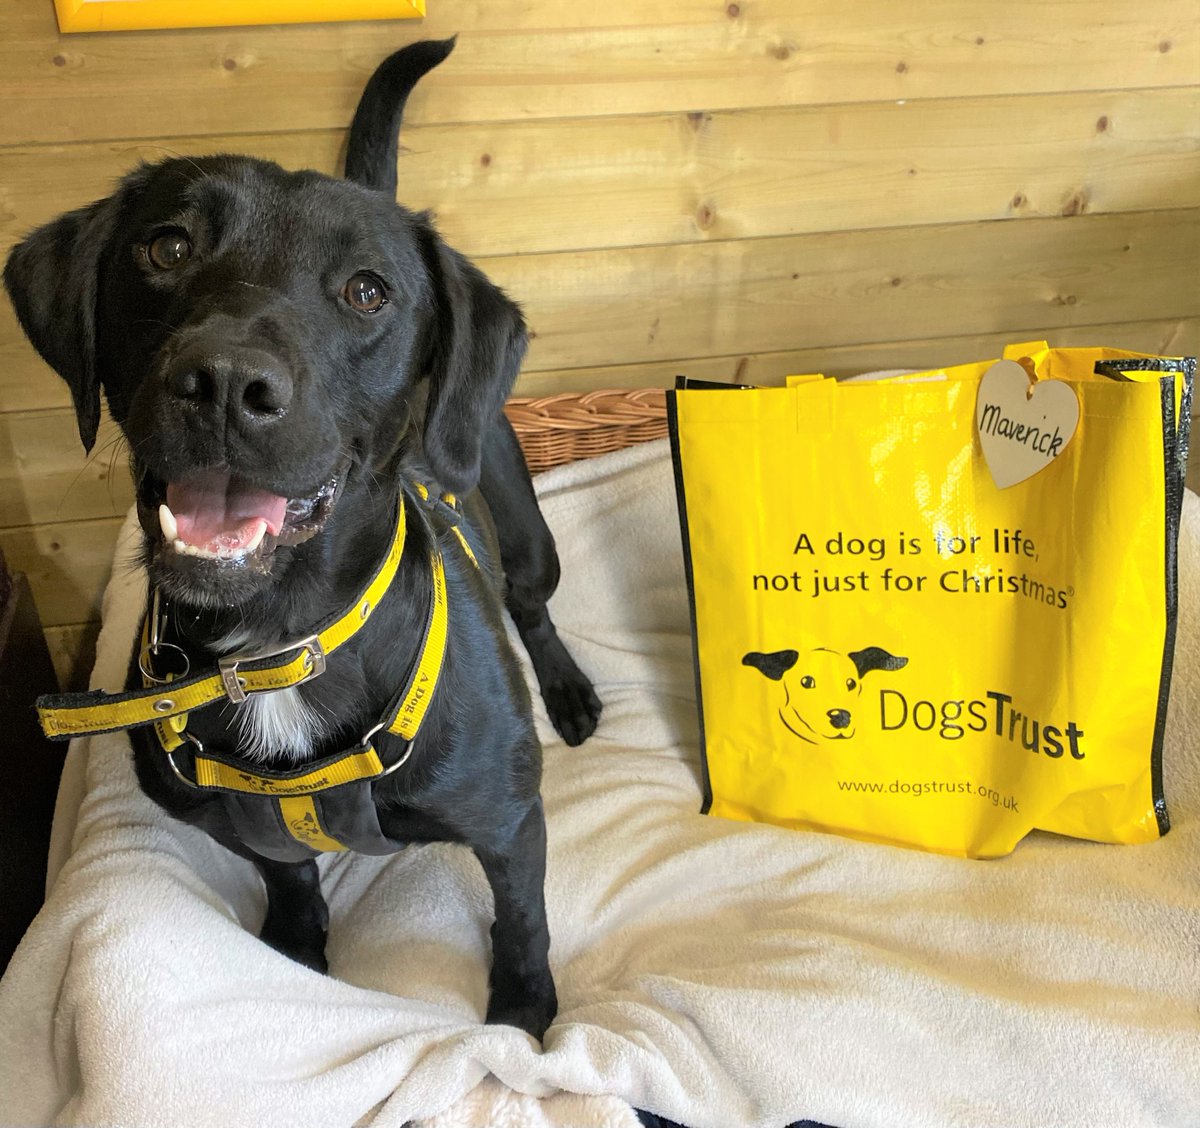 Handsome lad Maverick🥰was all smiles this afternoon as it was his turn to pack up his bags🛍️wave goodbye to his friends at the centre👋and head off with his family to his forever home🏡💛 

#BigYellowBagDay #AdoptDontShop #ADogIsForLife @dogstrust